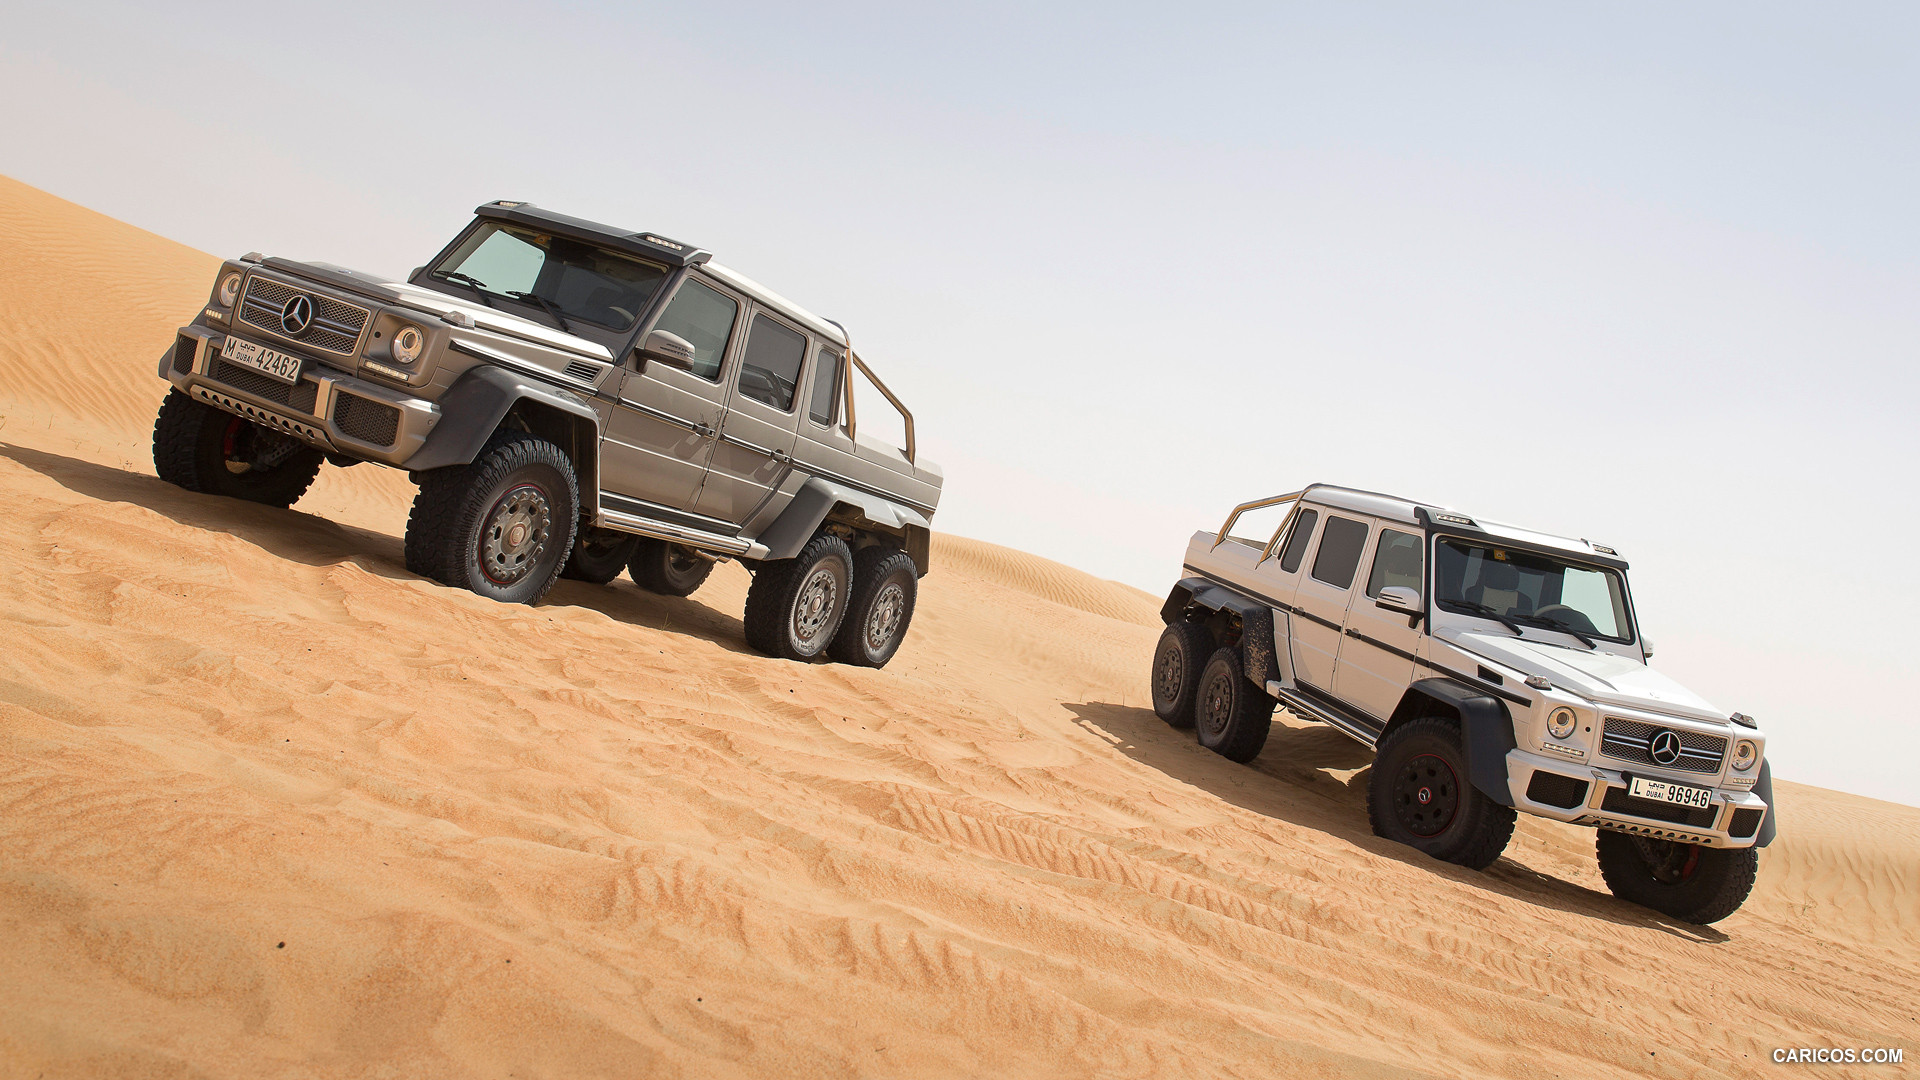 2013 Mercedes-Benz G63 AMG 6x6 Concept Duo - Front, #43 of 57